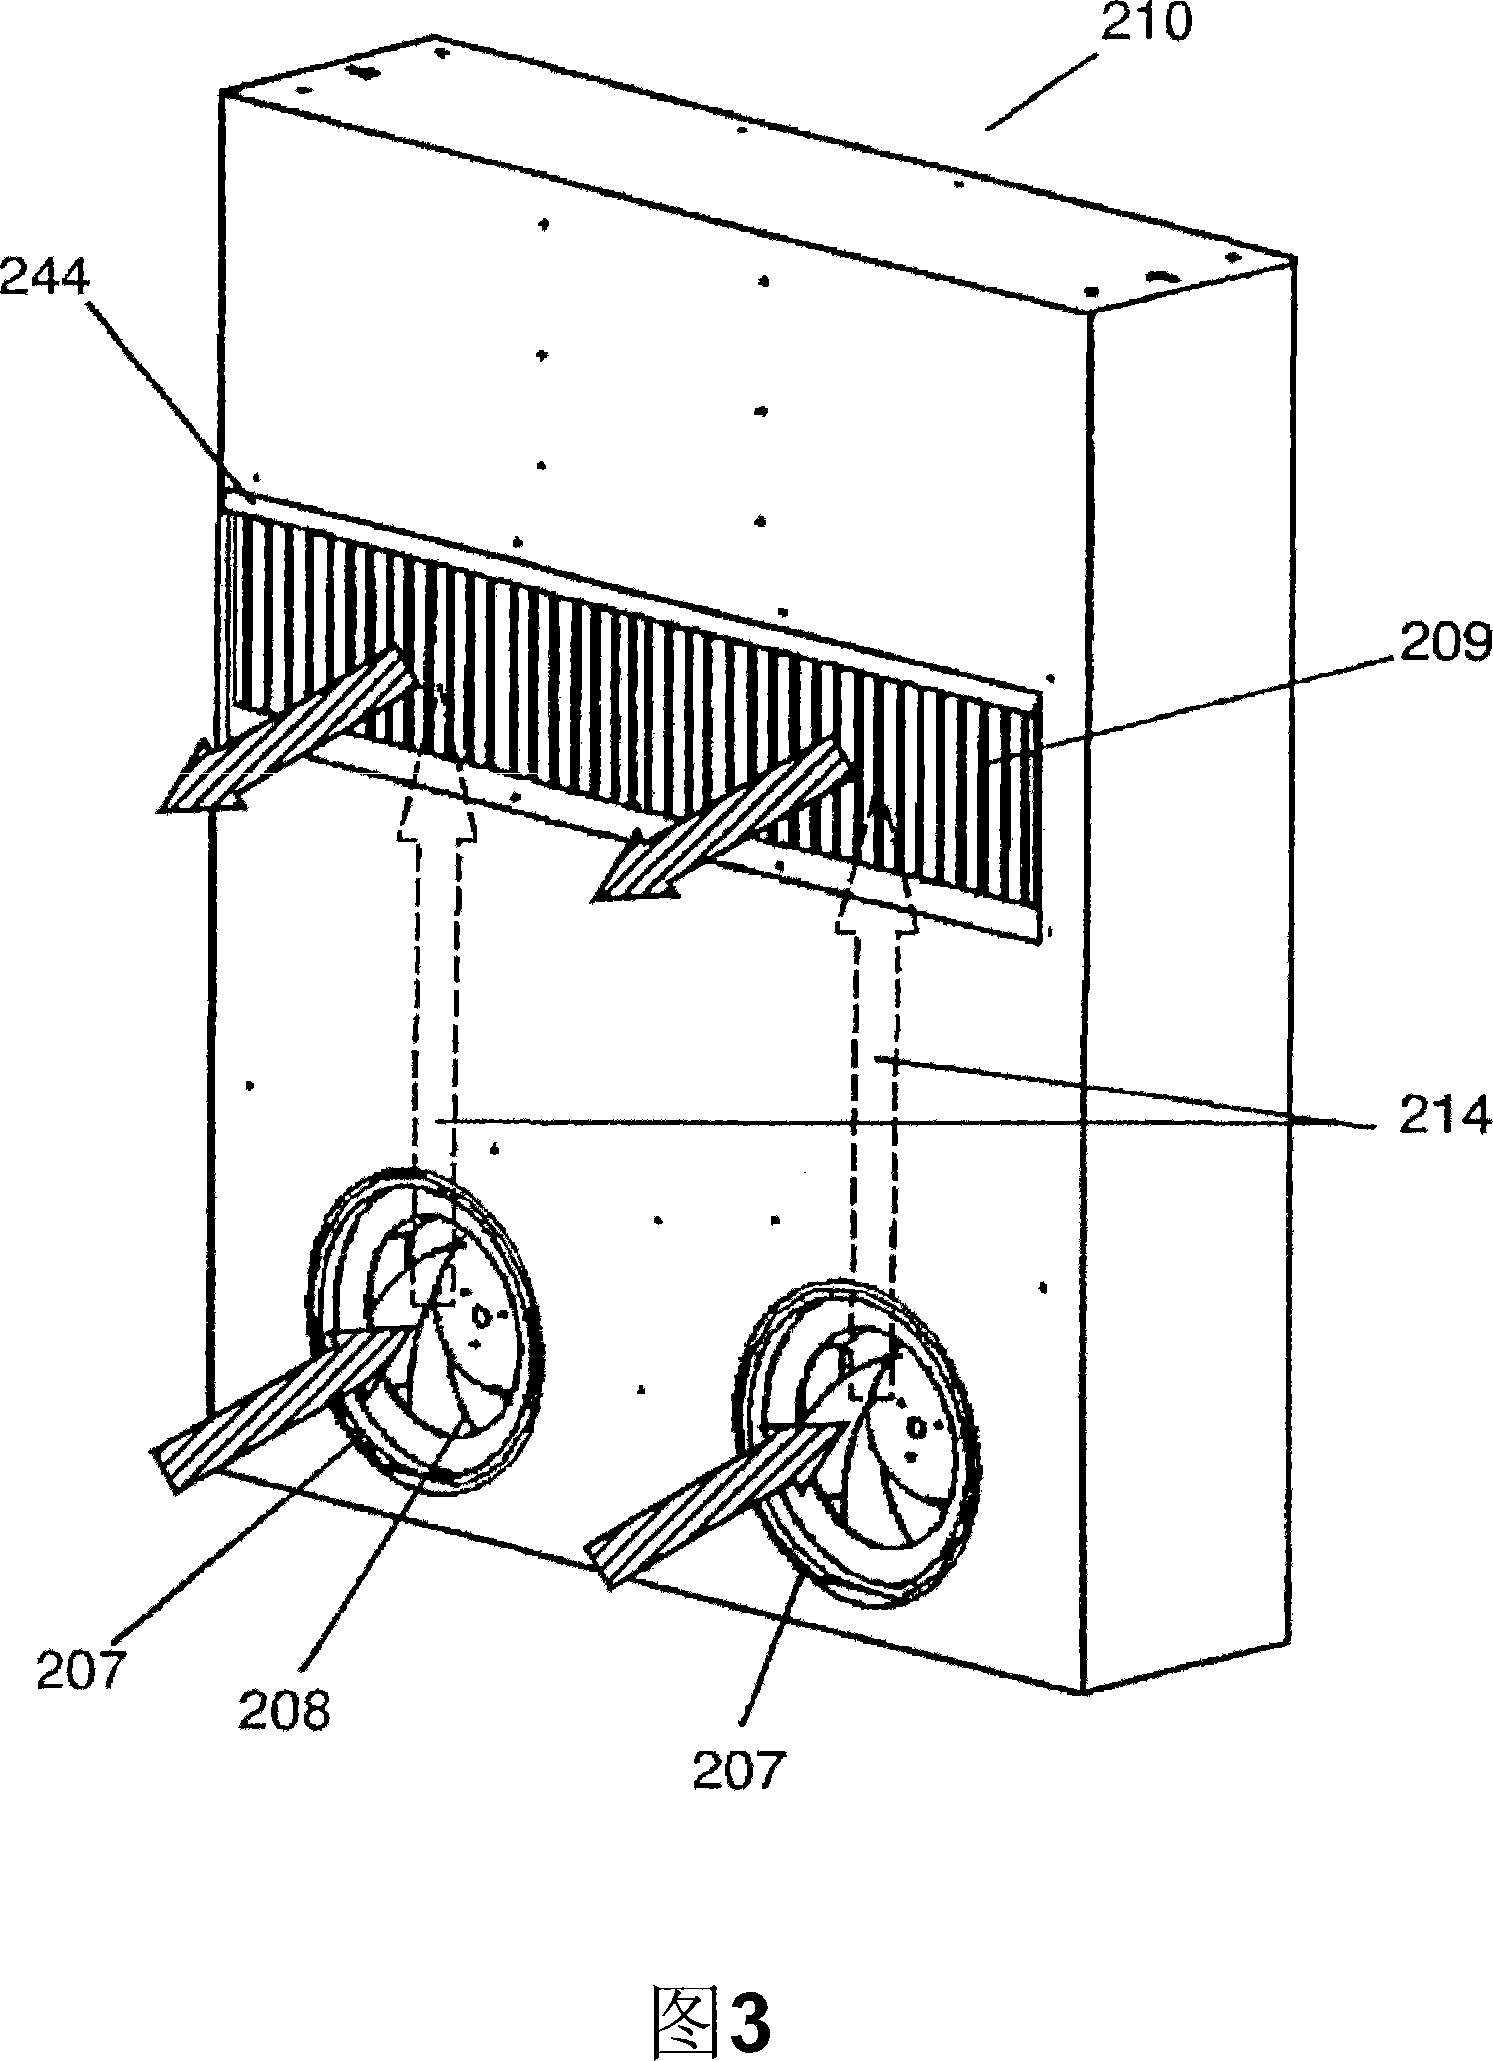 Cooler for heater-containing box